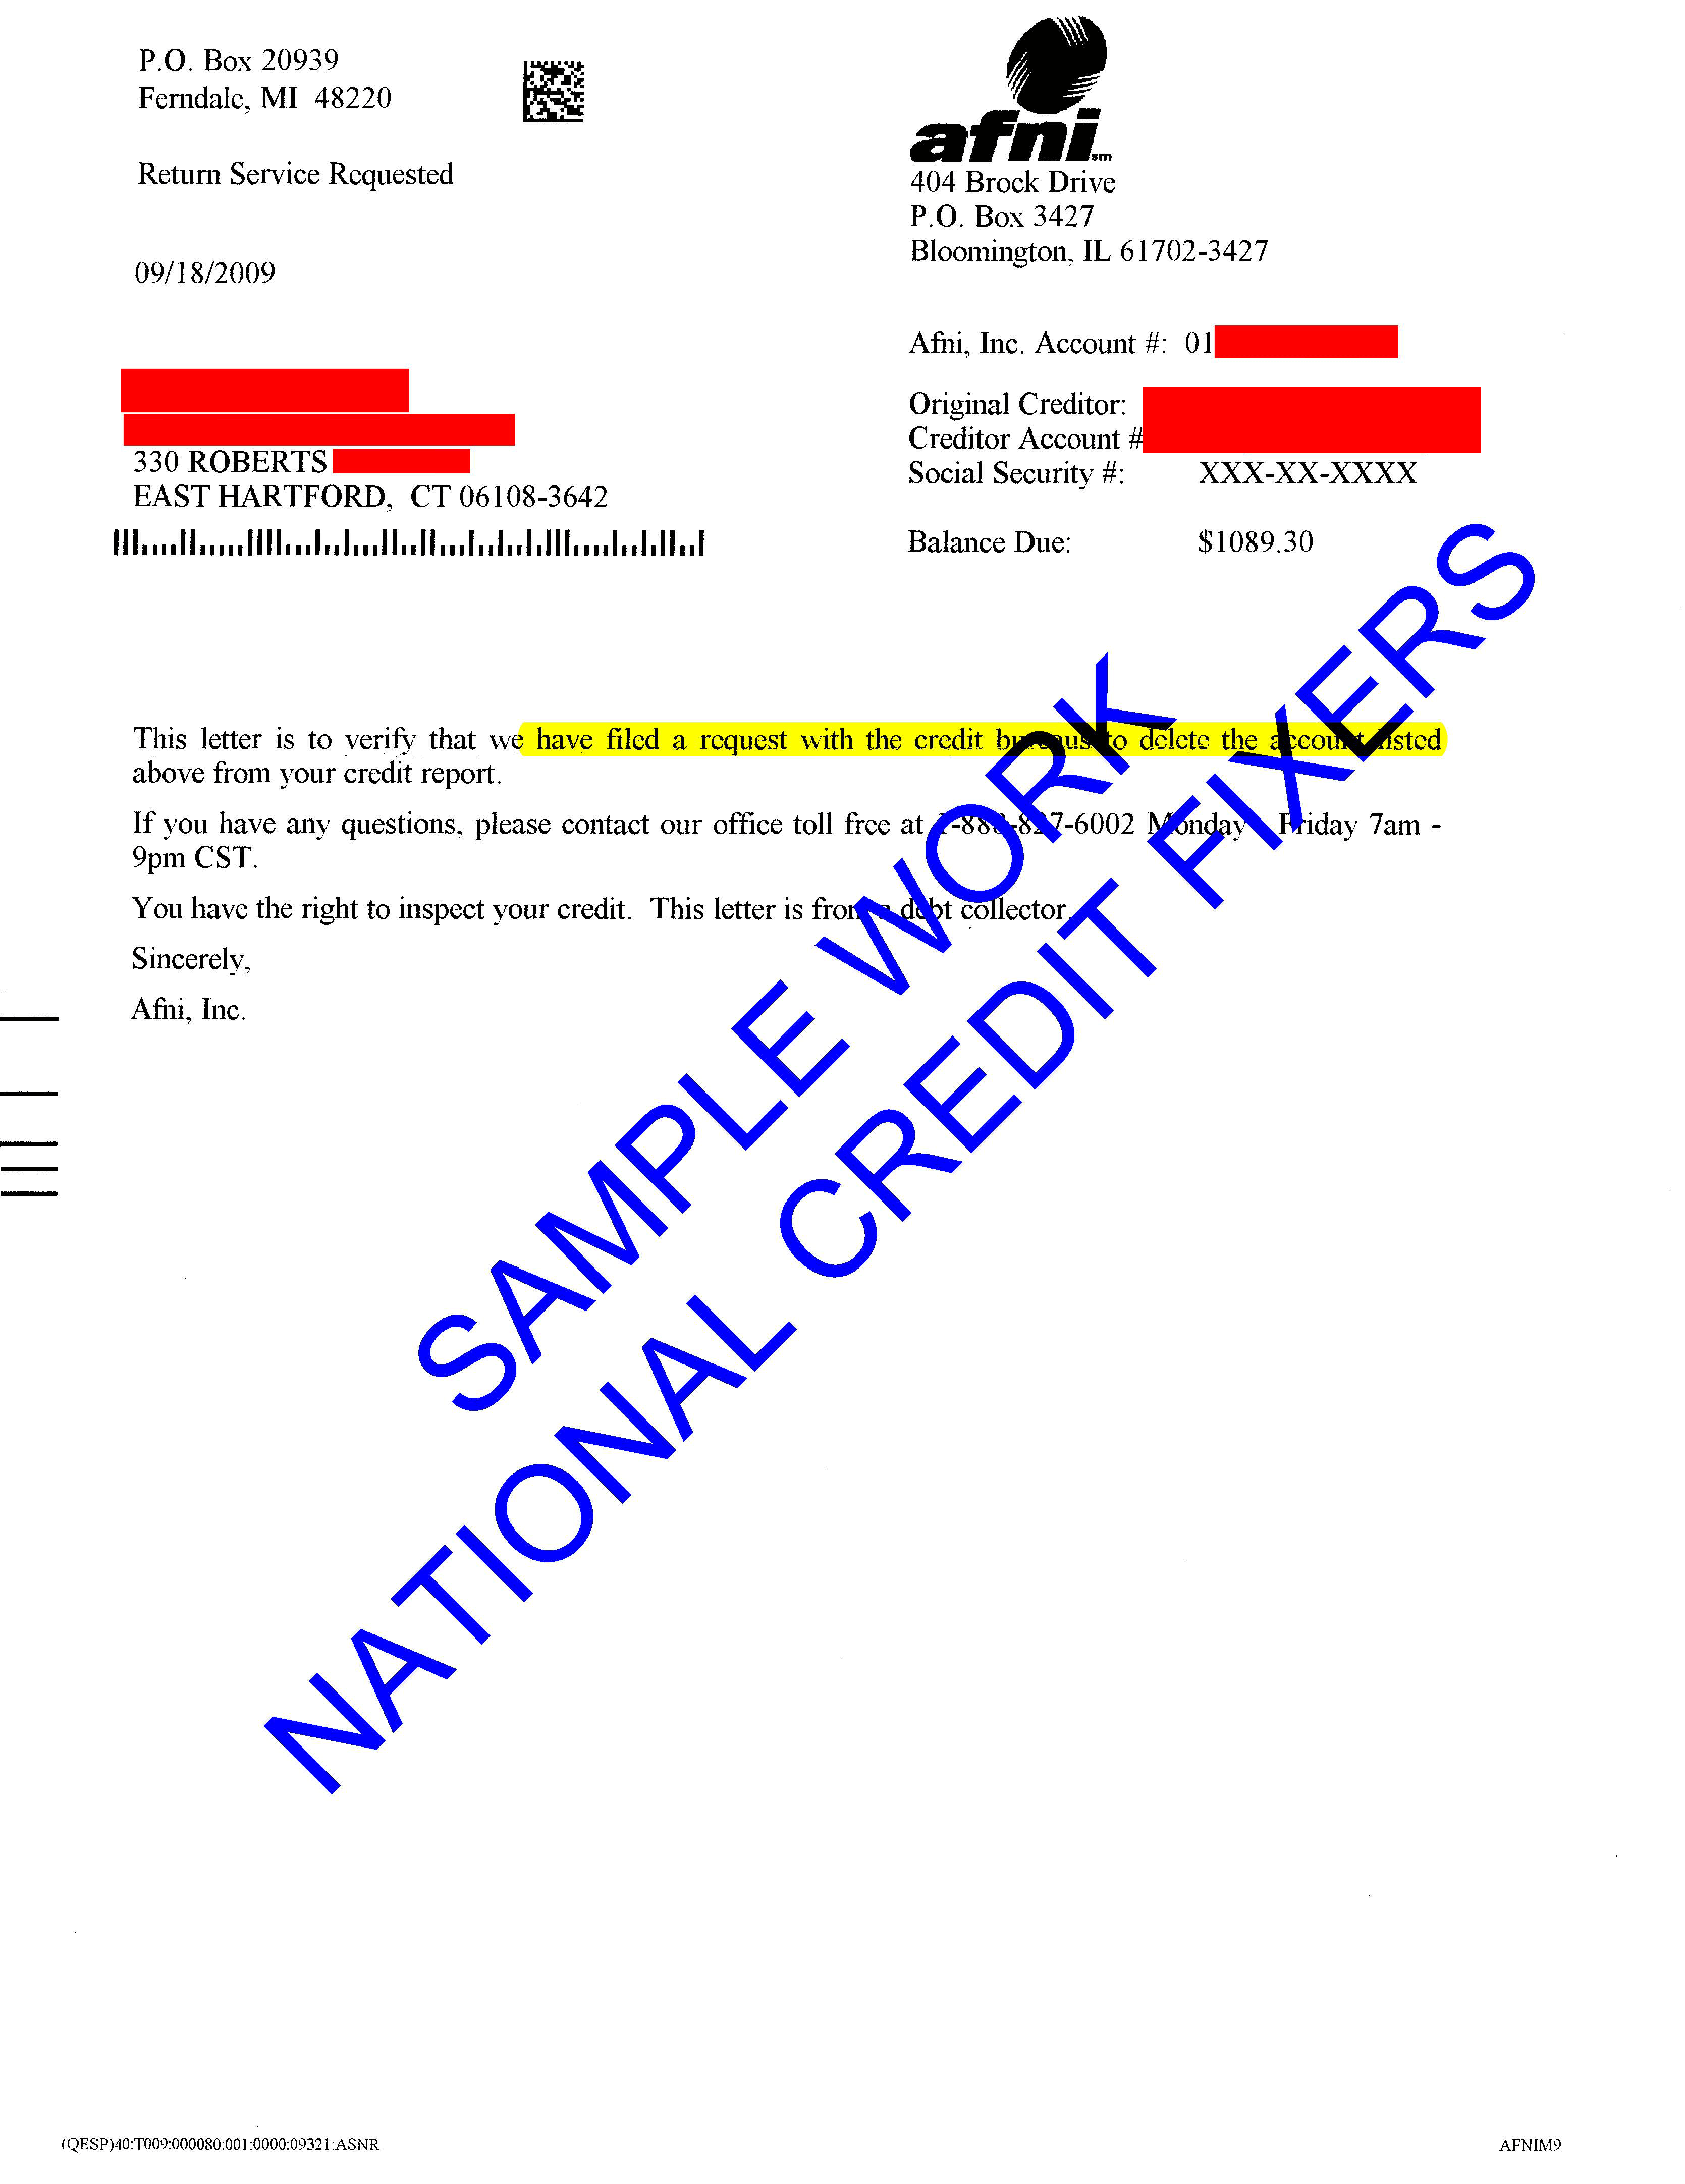 Anderson Financial Network Deletion Letter 4